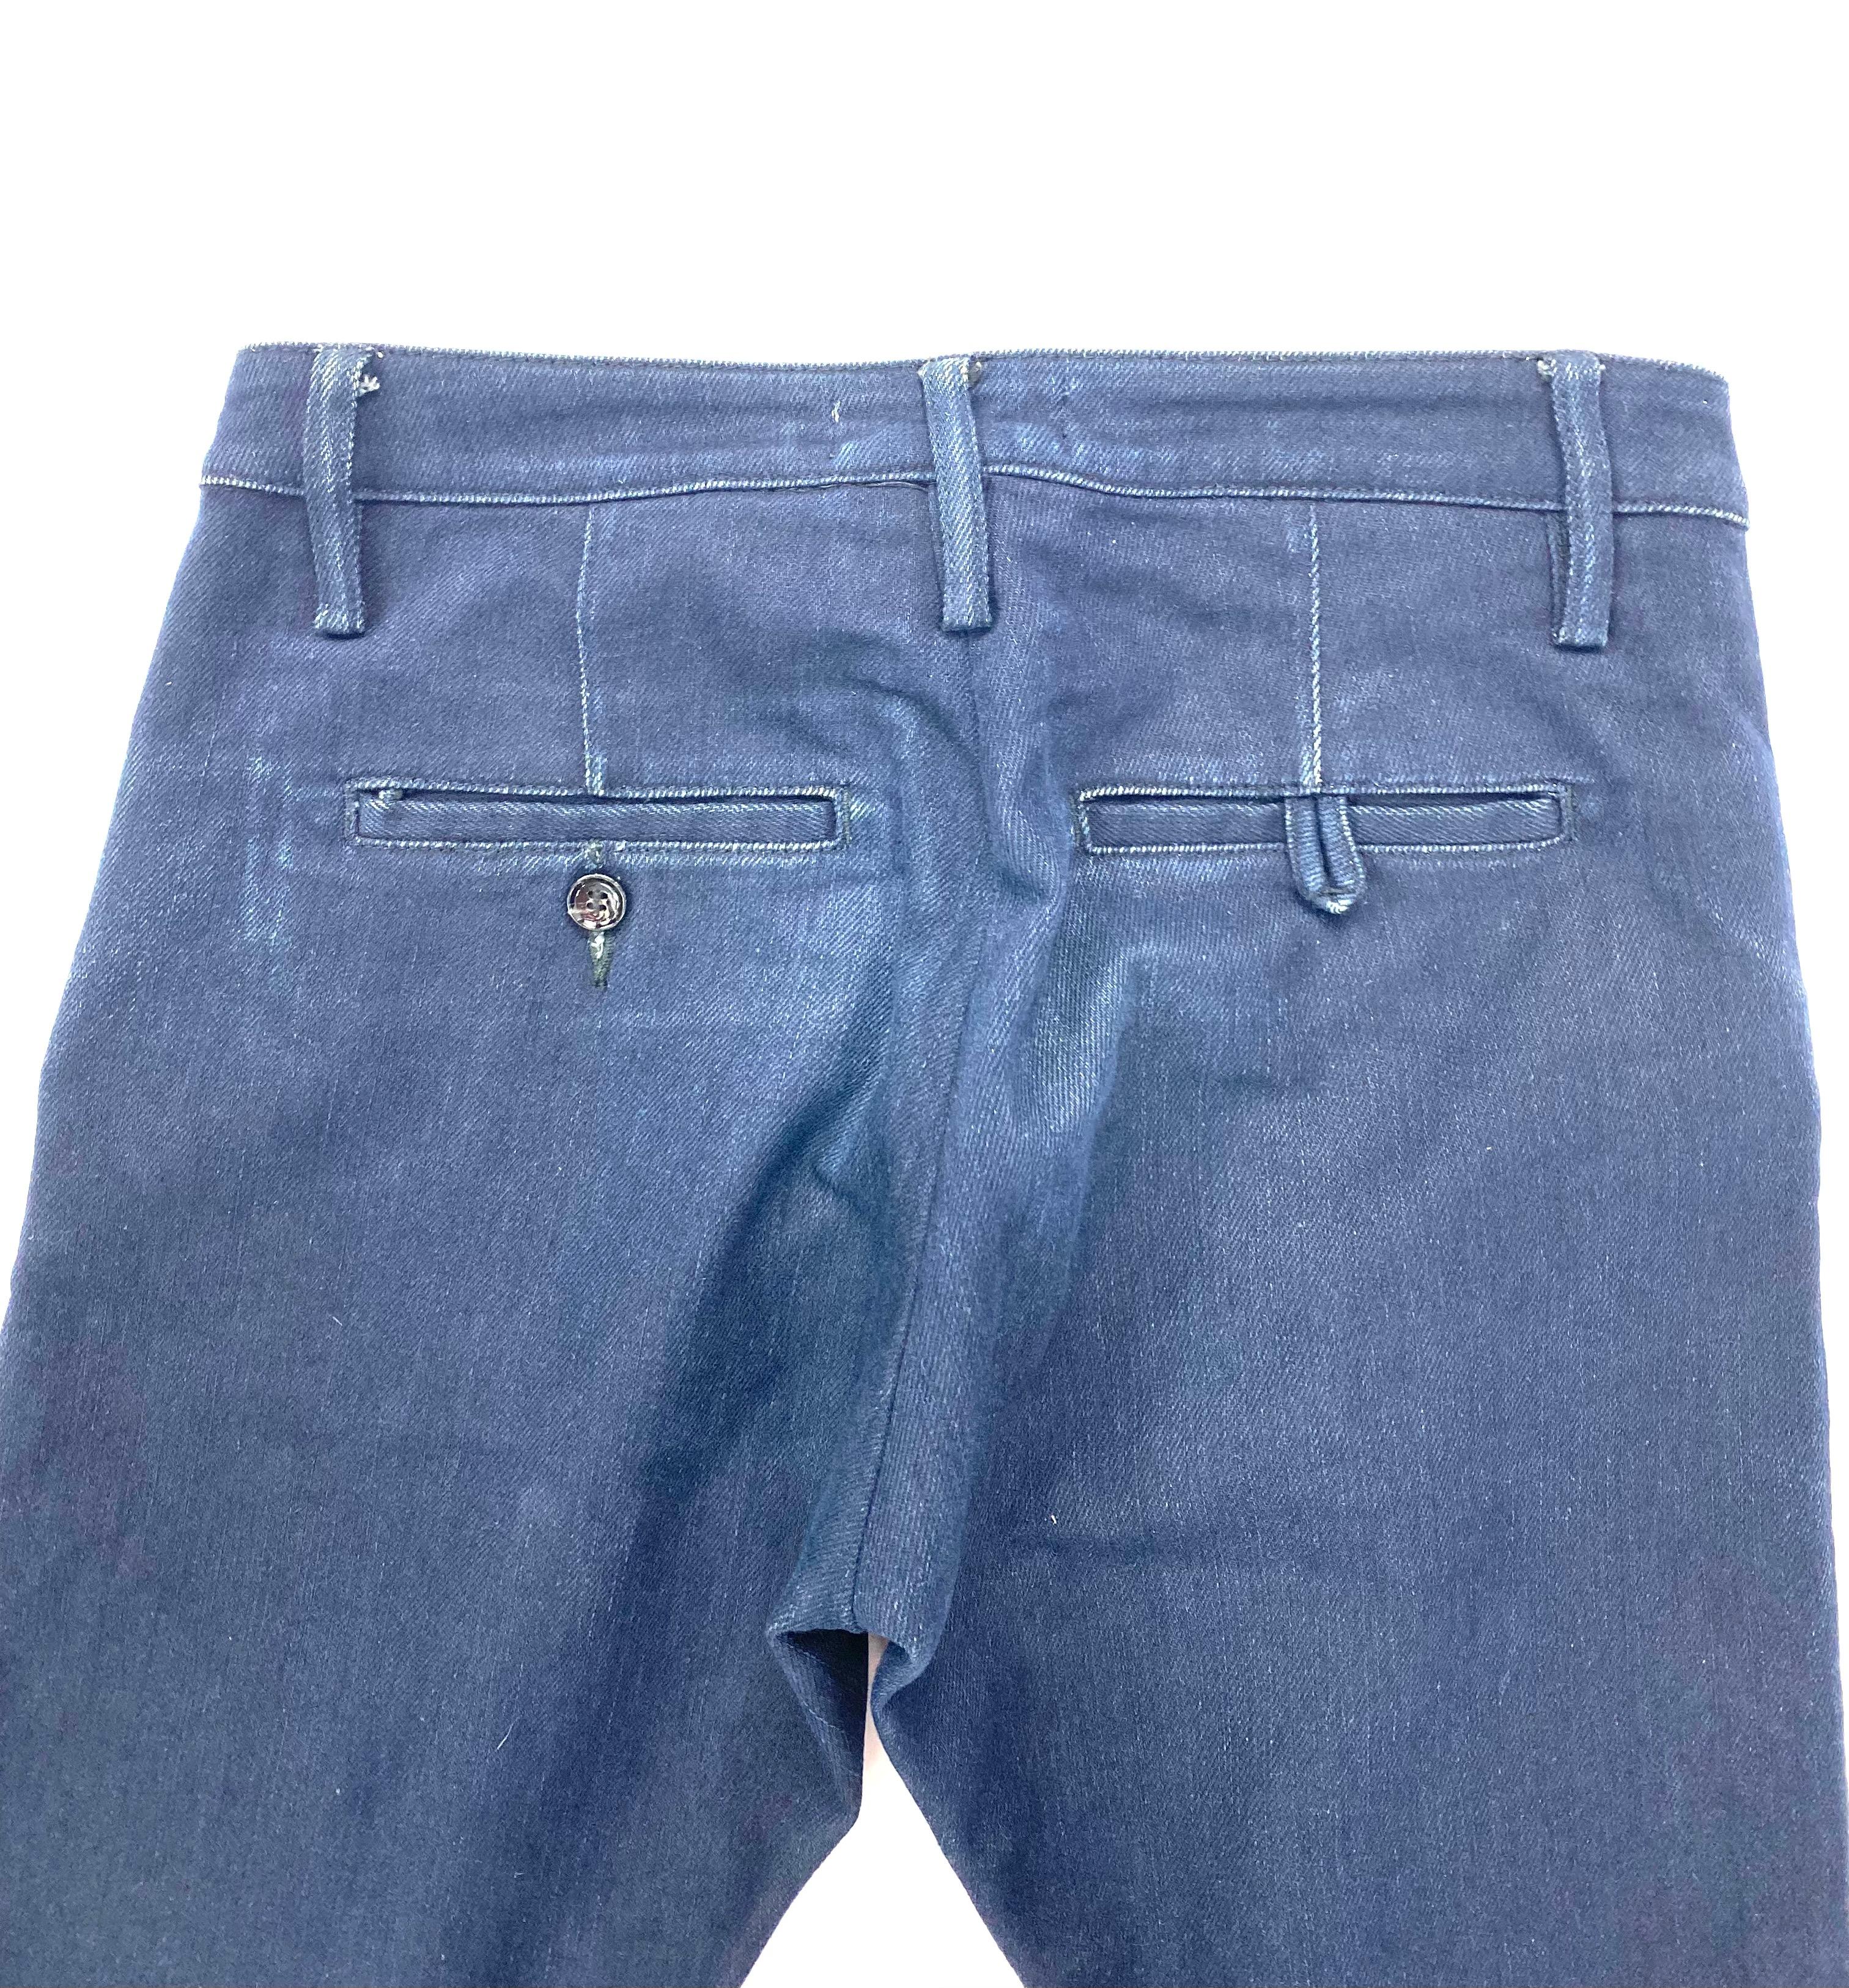 Acne Joy Sharp Blue Denim Jeans Pants, Size 25/32 In Excellent Condition For Sale In Beverly Hills, CA